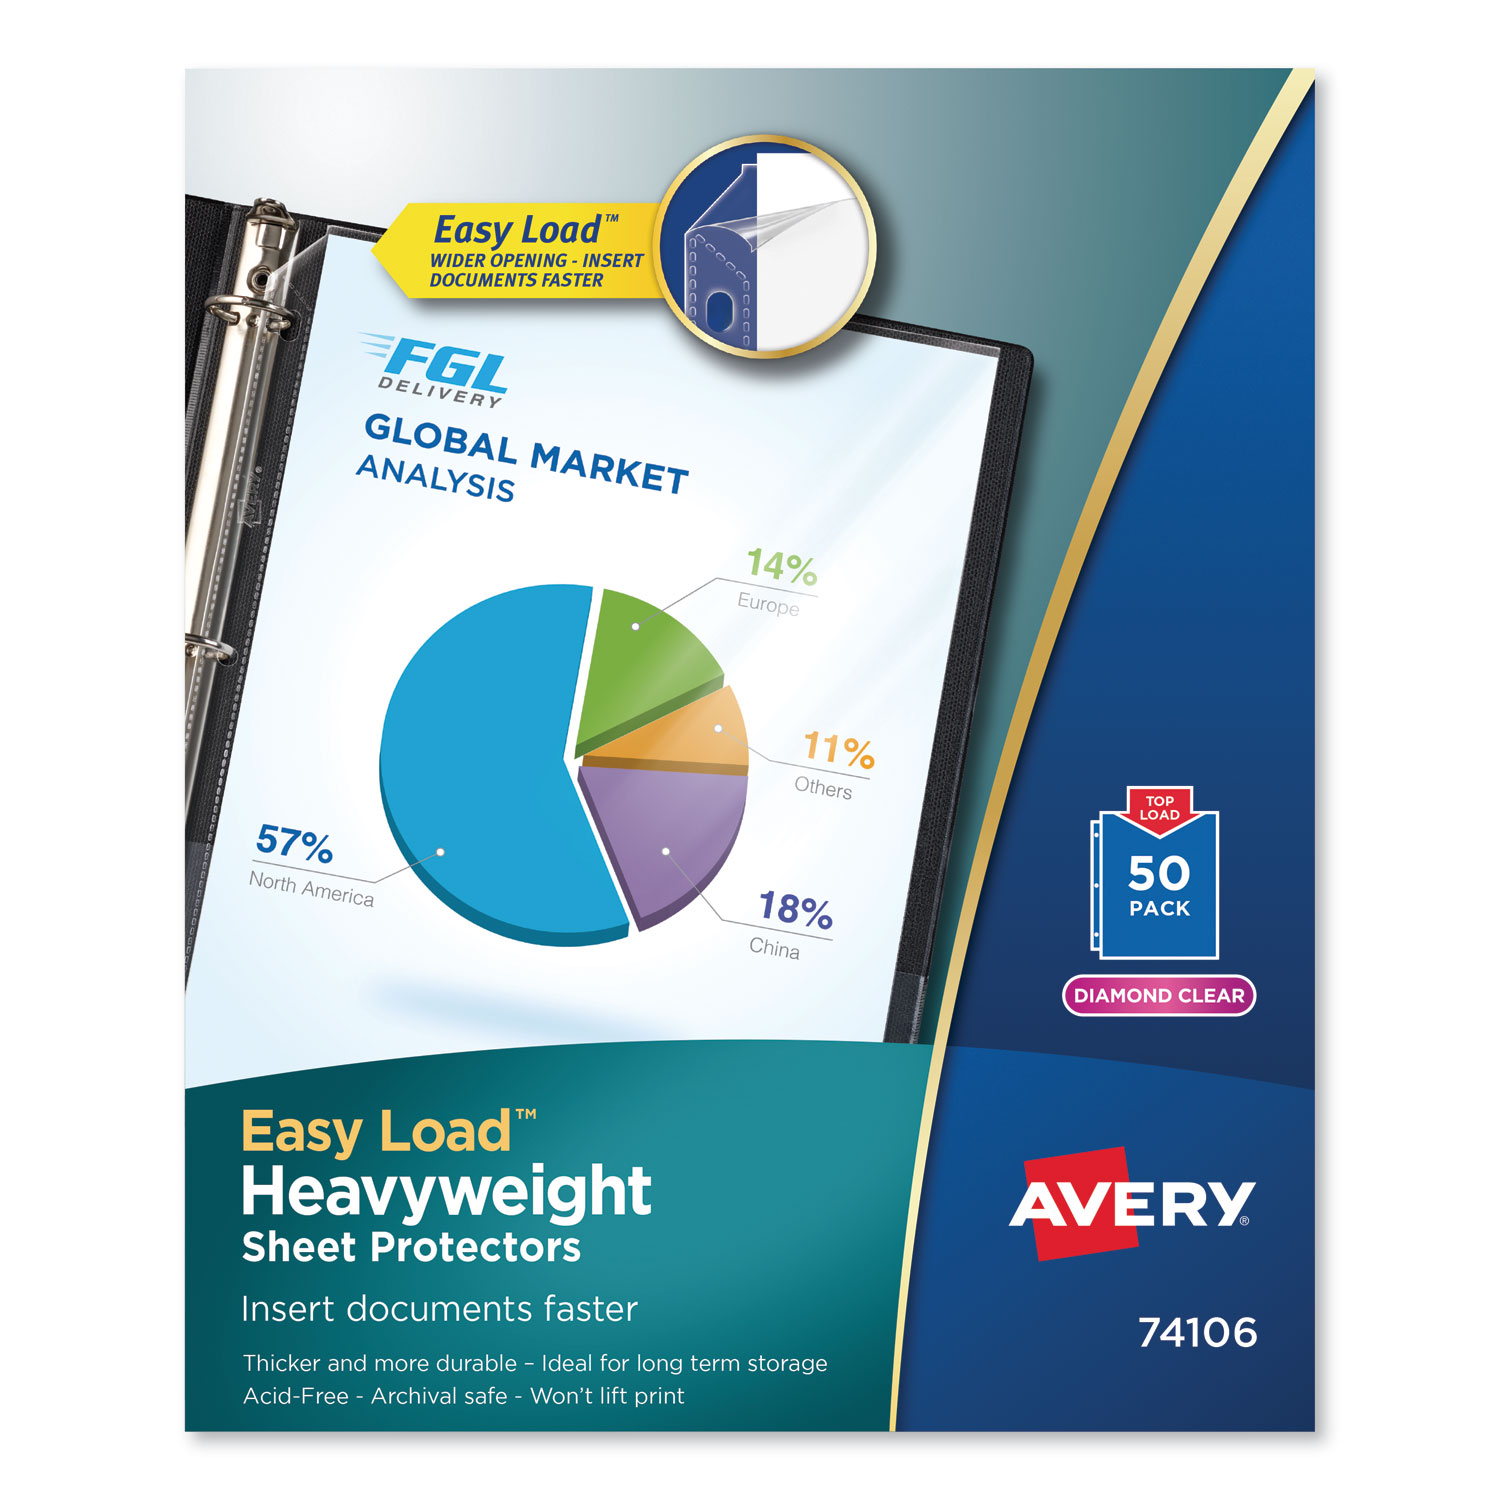  Avery 74106 Top-Load Poly Sheet Protectors, Heavy Gauge, Letter, Diamond Clear, 50/Box (AVE74106) 